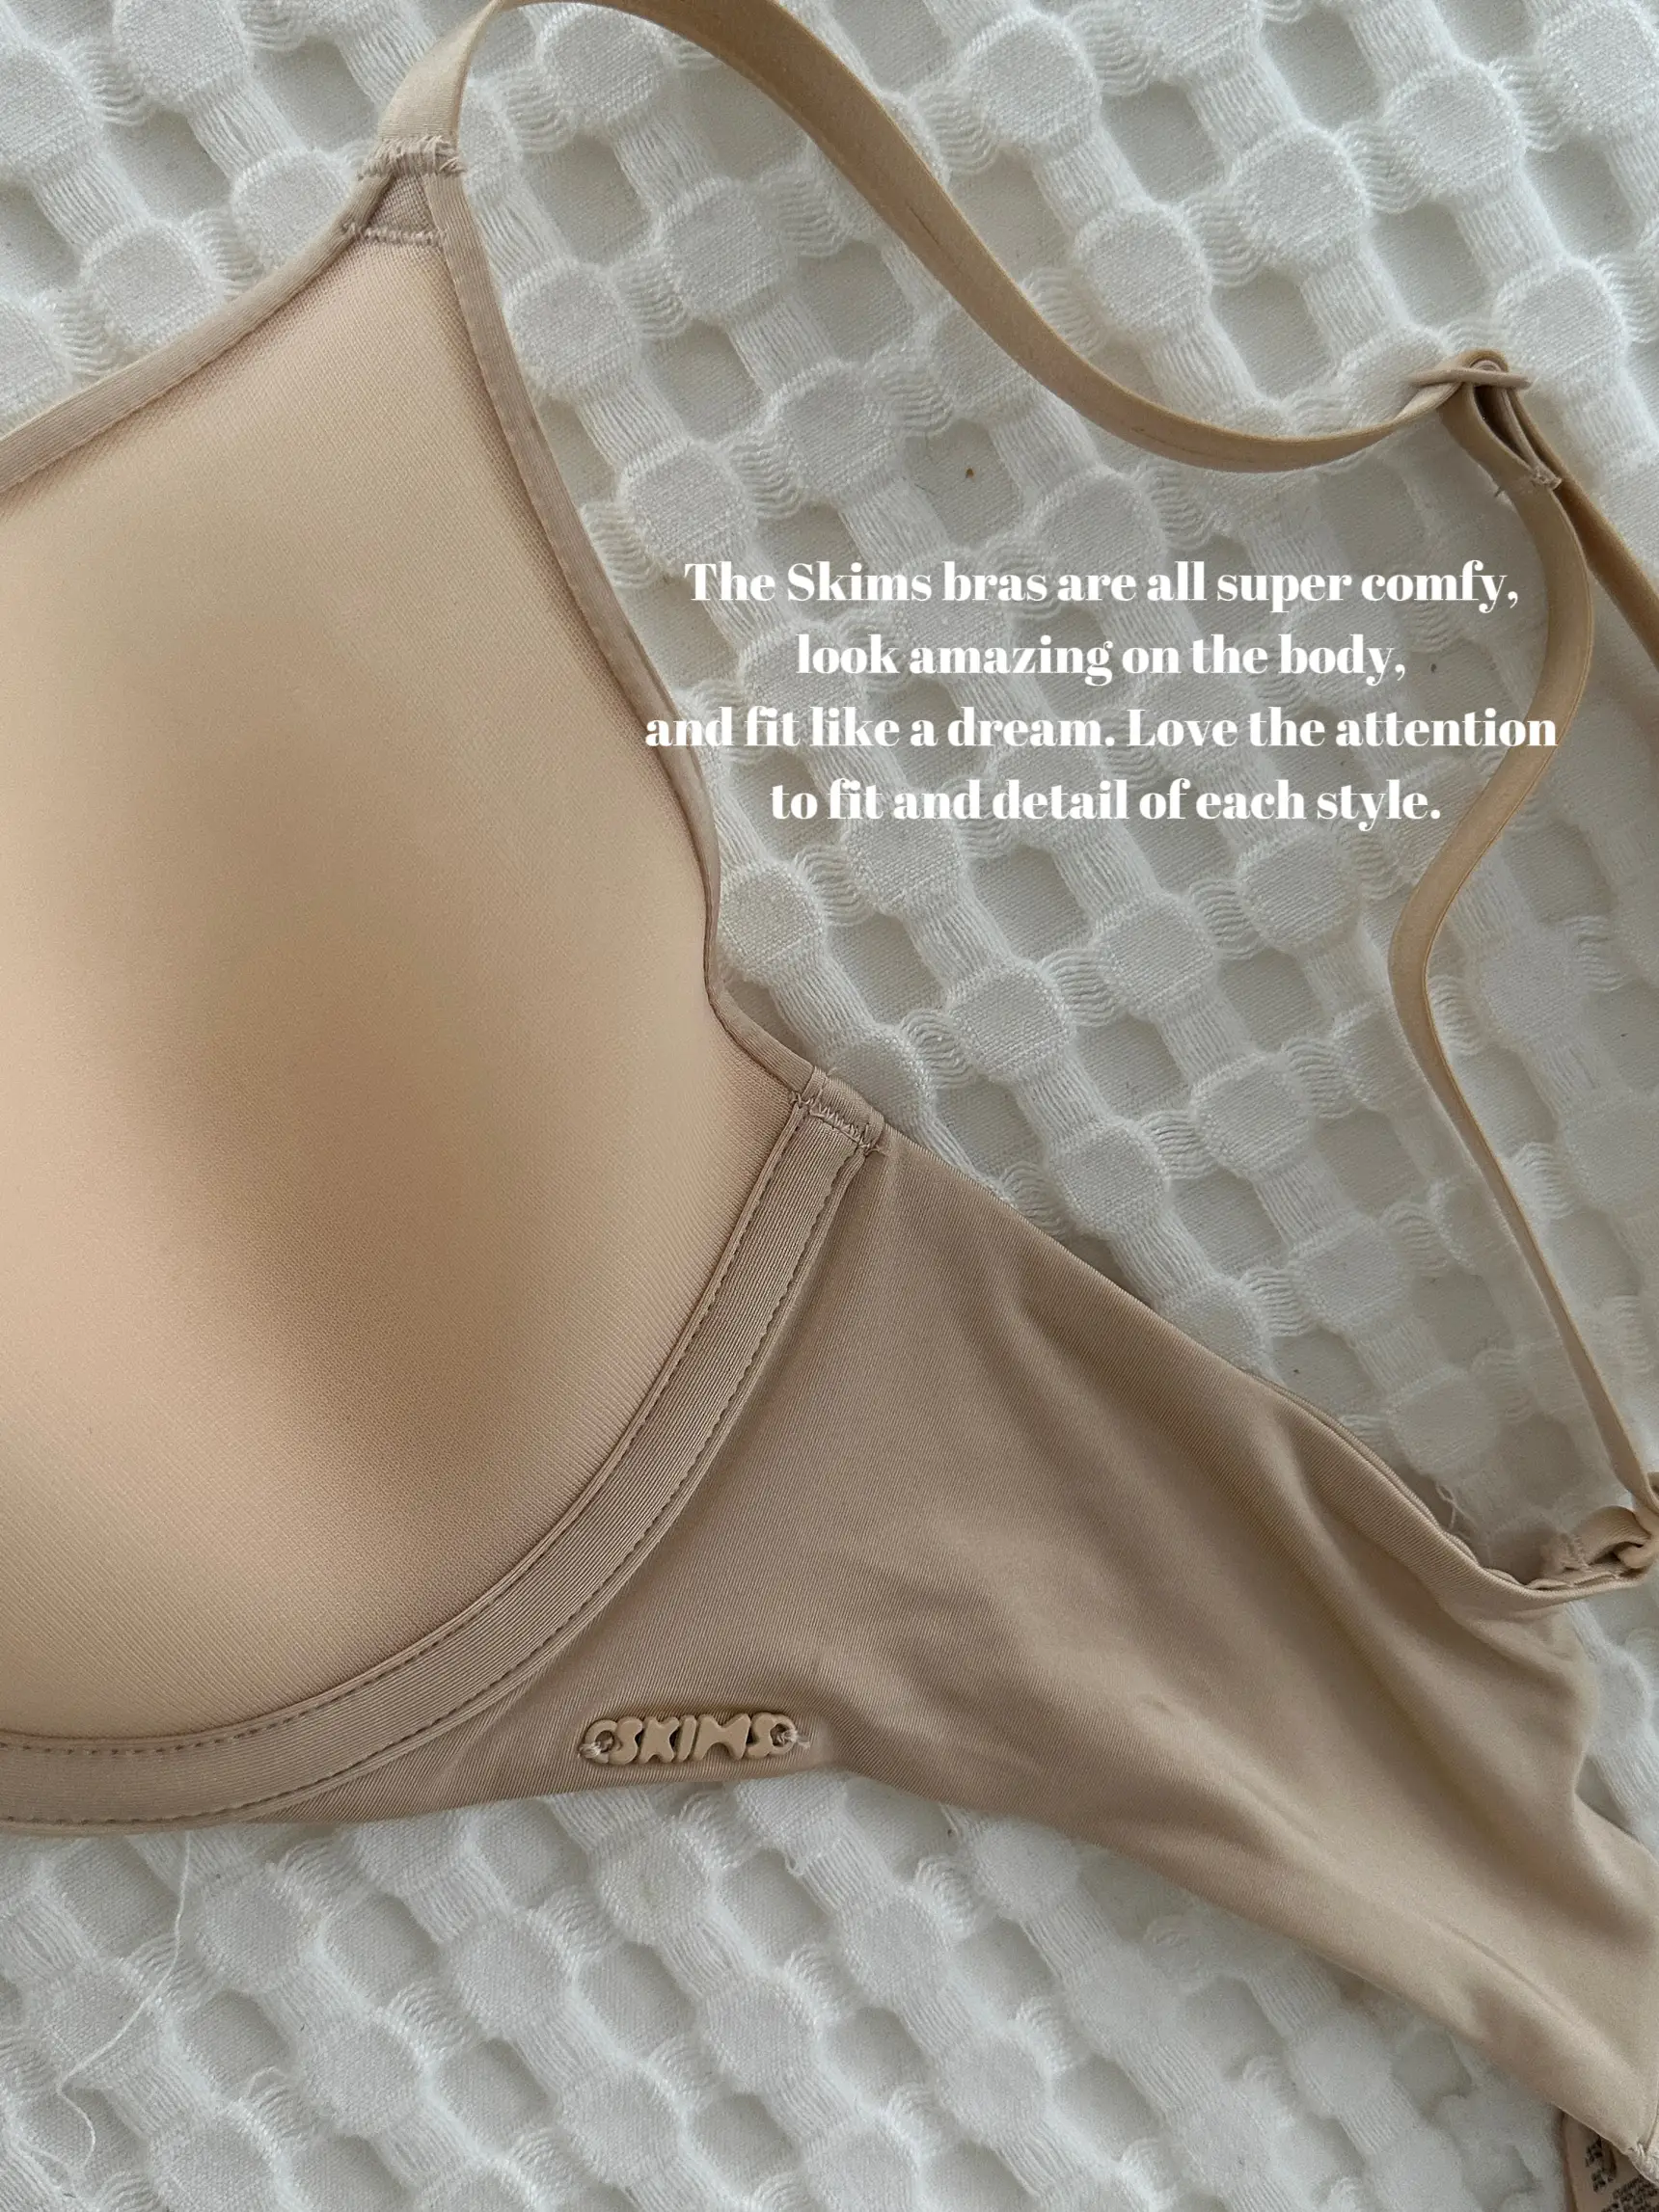 I tried 6 of Skims' best selling bras and these are the ones that